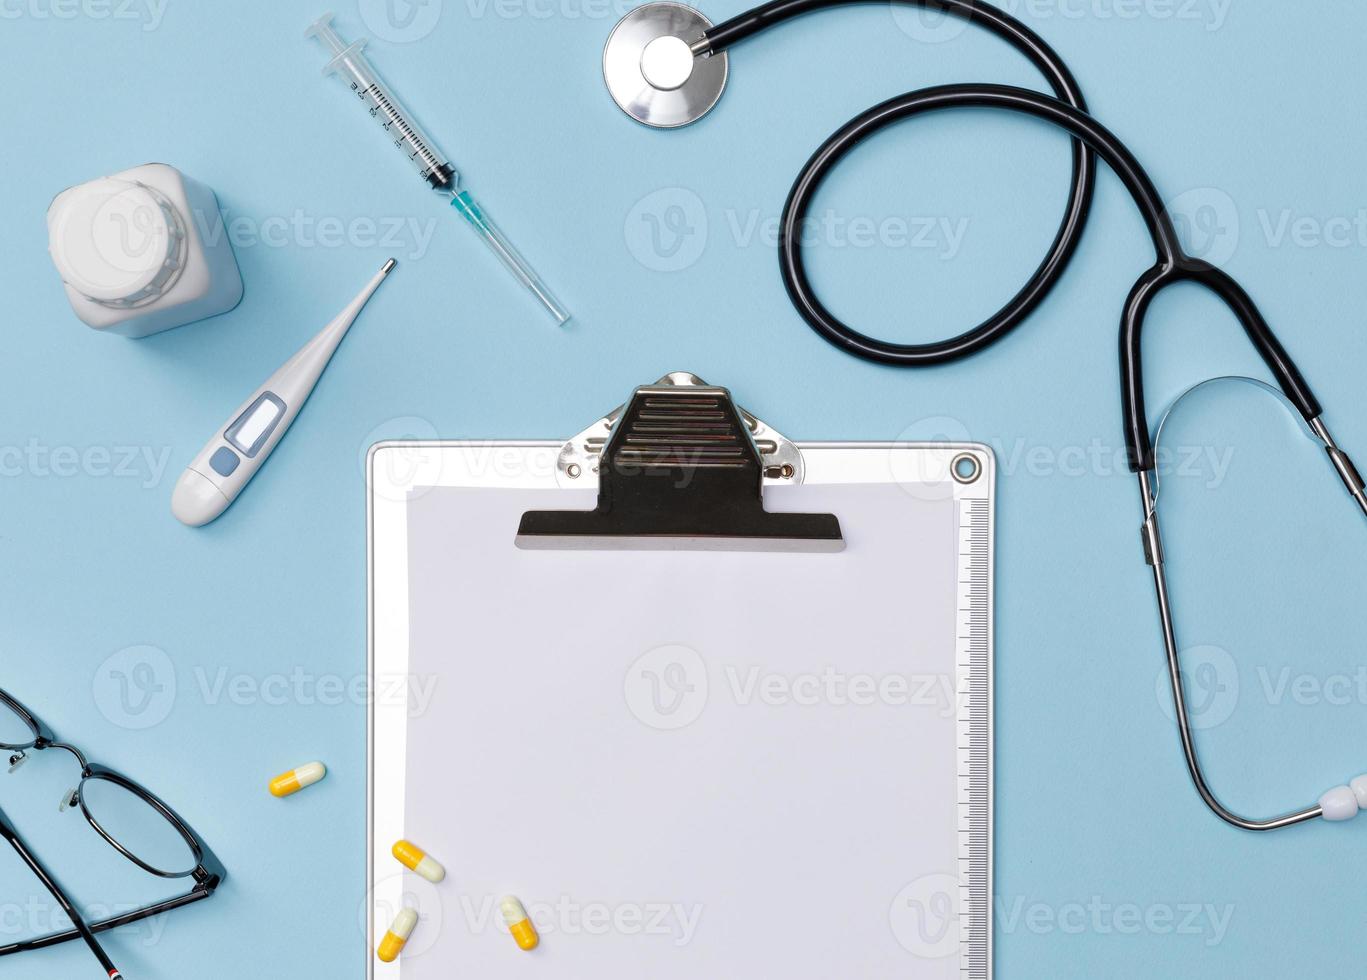 Creative flatlay of doctor medical equipment blue table with stethoscope, medical documents, thermometer, syringe and pills, Health care concept, Top view with copy space, Isolated on blue photo